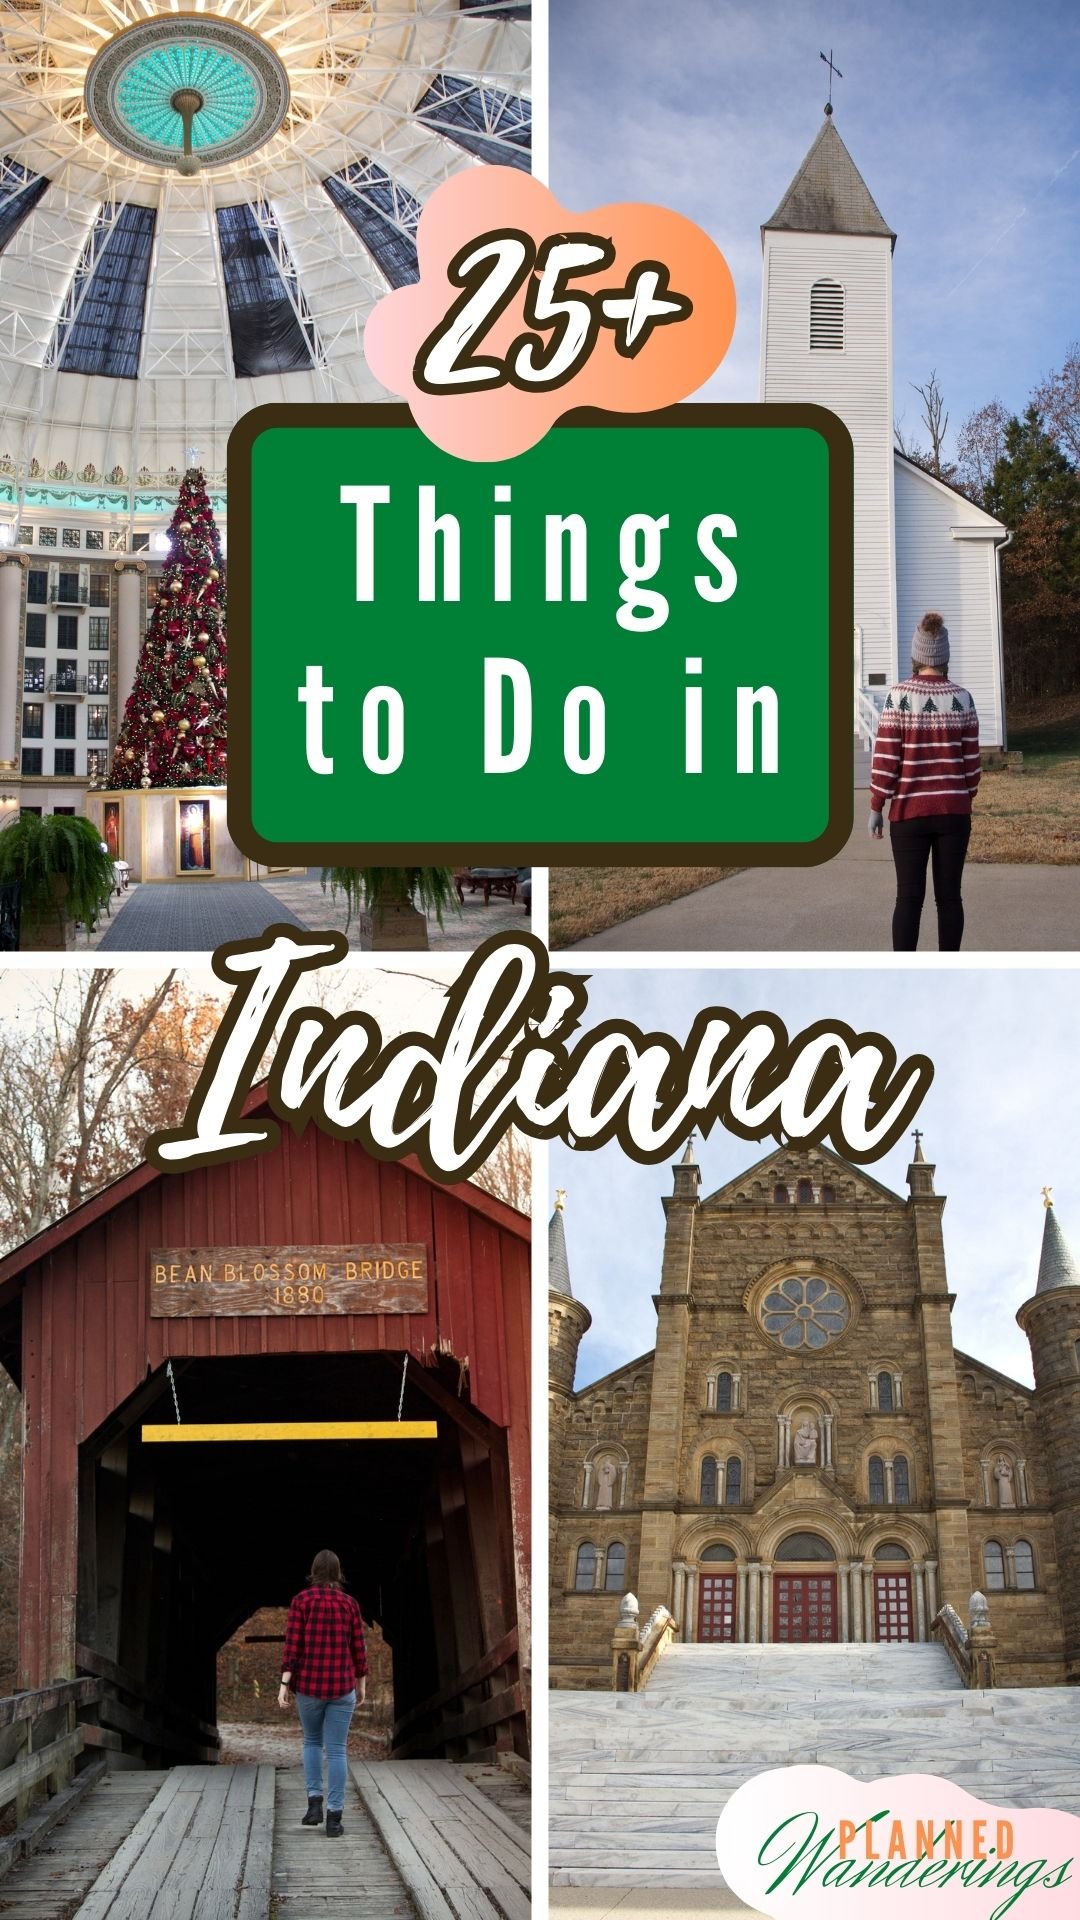 things-to-do-in-indiana-pinterest-pin